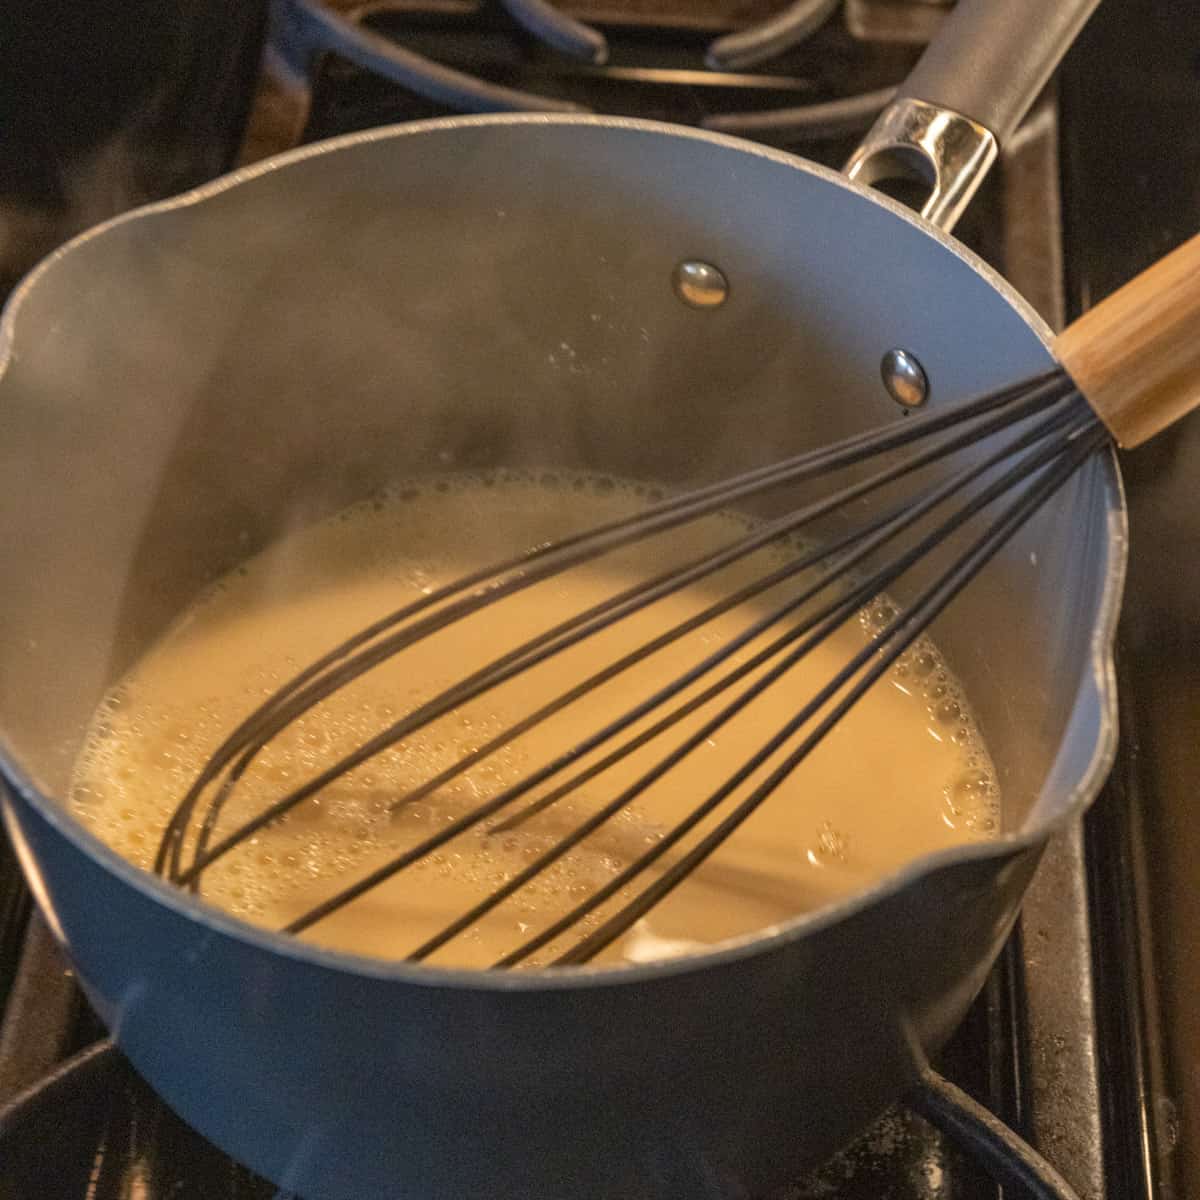 Warming milk in a pot with a whisk